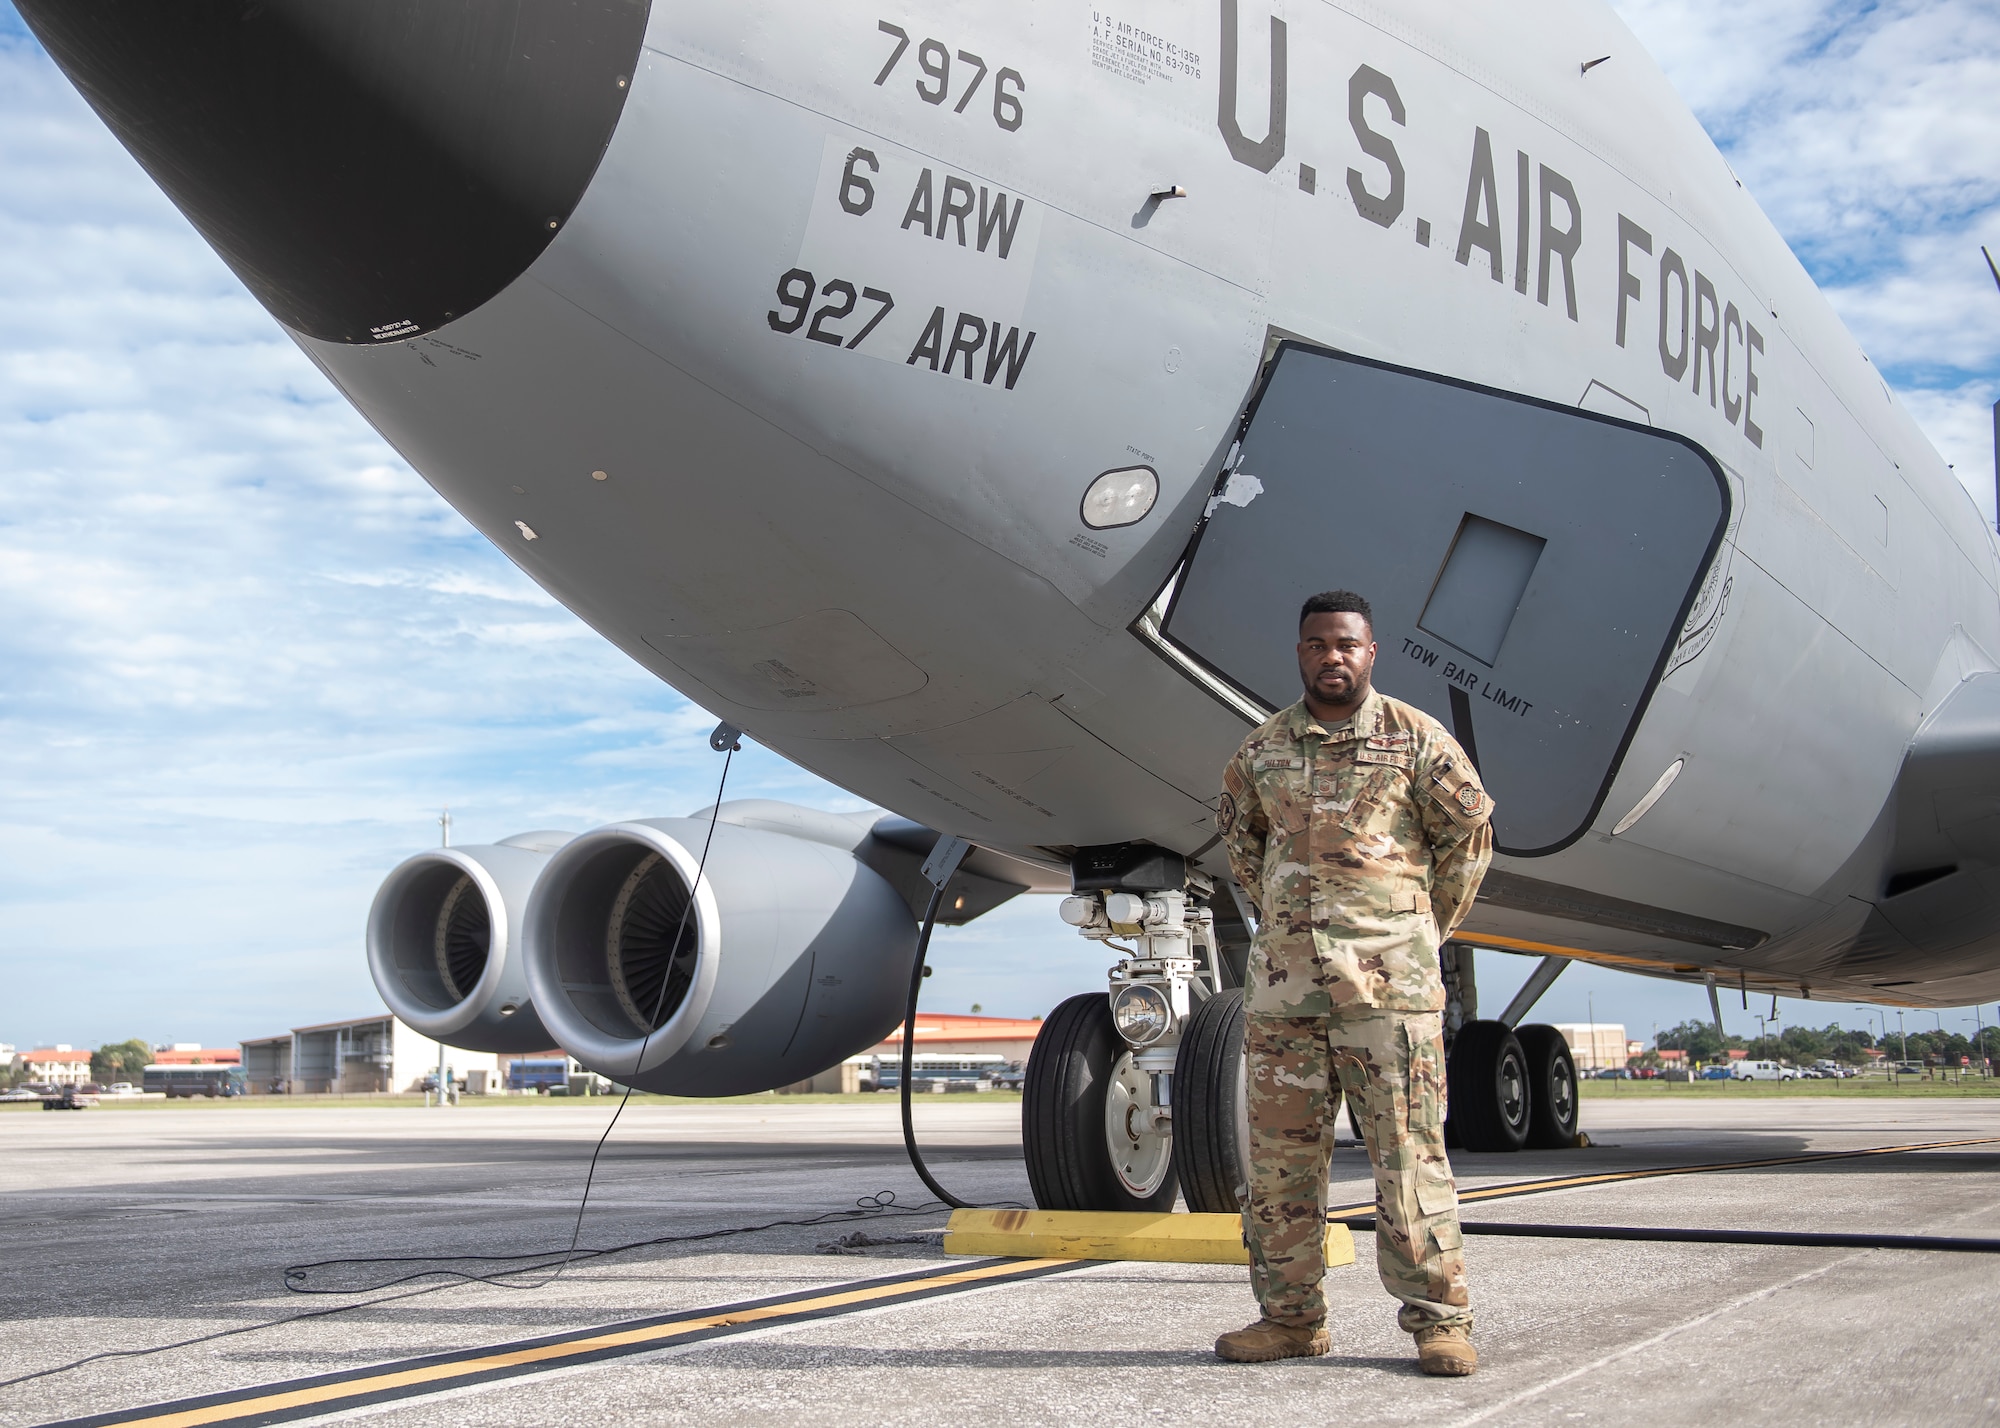 U.S. Air Force MSgt. Michael Fulton, 50th Air Refueling Squadron superintendent, pauses for a photo in front of a KC-135 Stratotanker aircraft on the flight line Oct. 6, 2021, at MacDill Air Force Base, Florida.